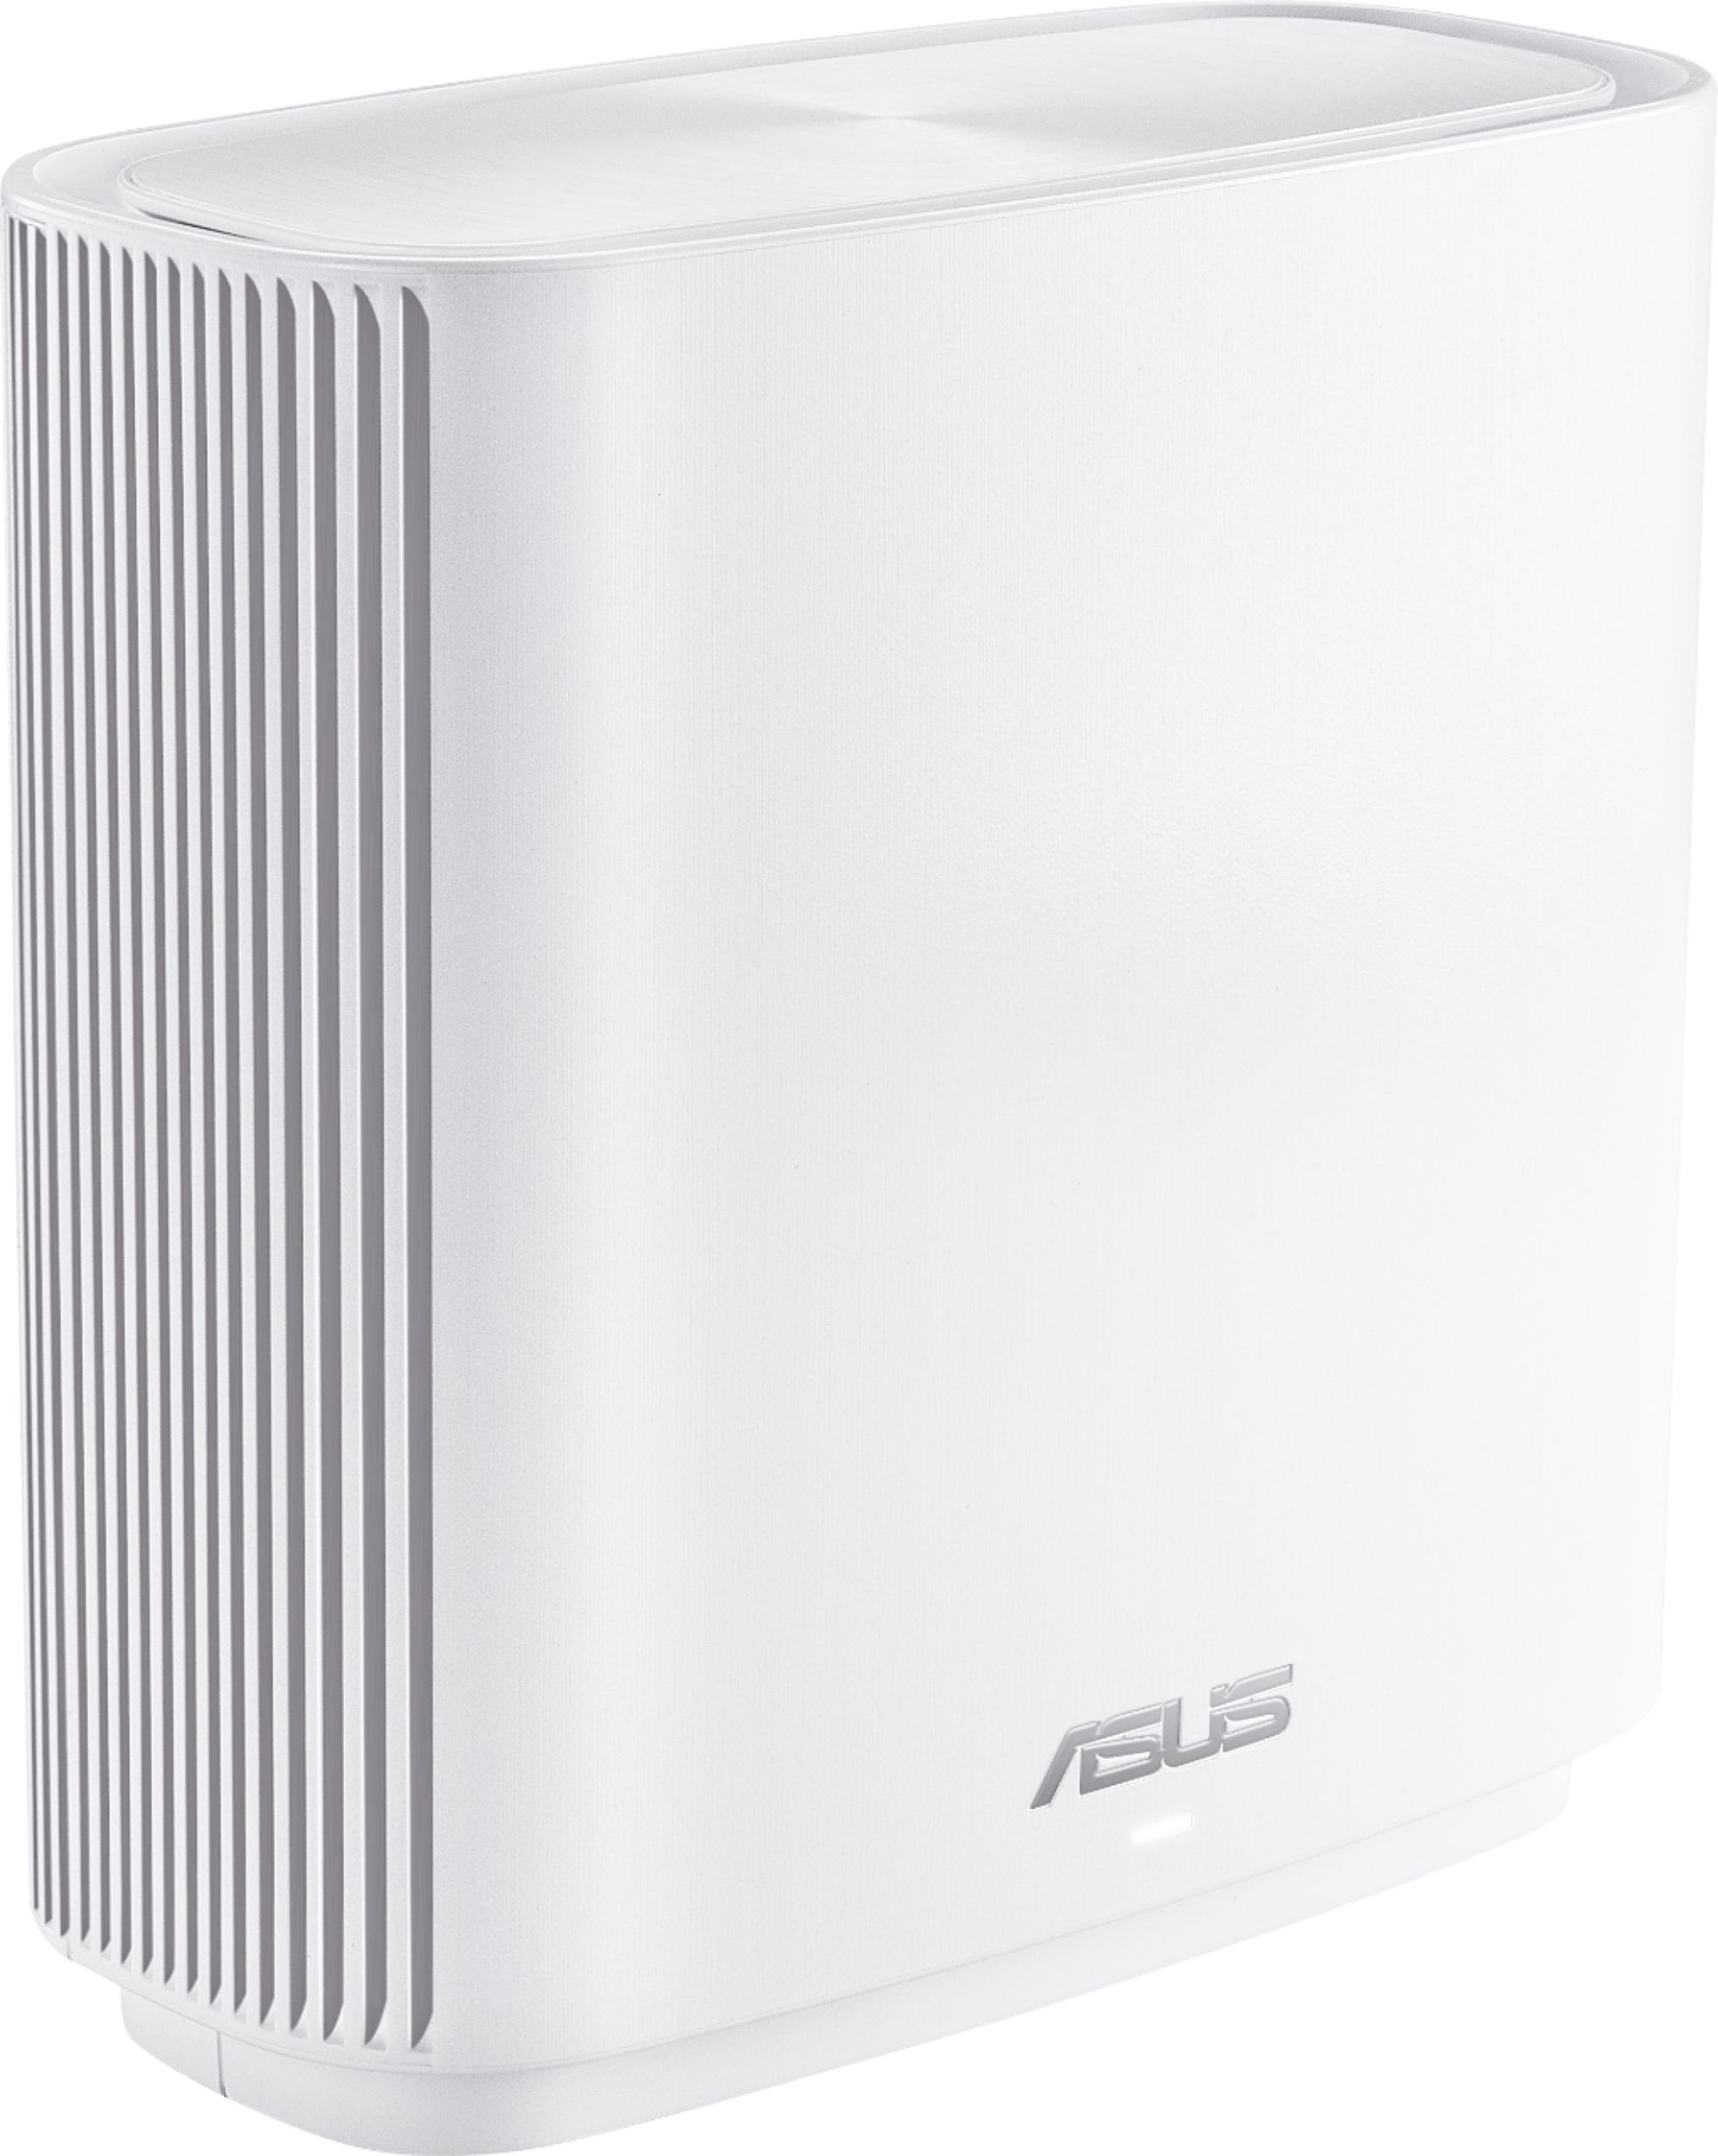 Angle View: ASUS - ZenWiFi AC3000 Tri-Band Mesh Wi-Fi System (2-pack) - White - White